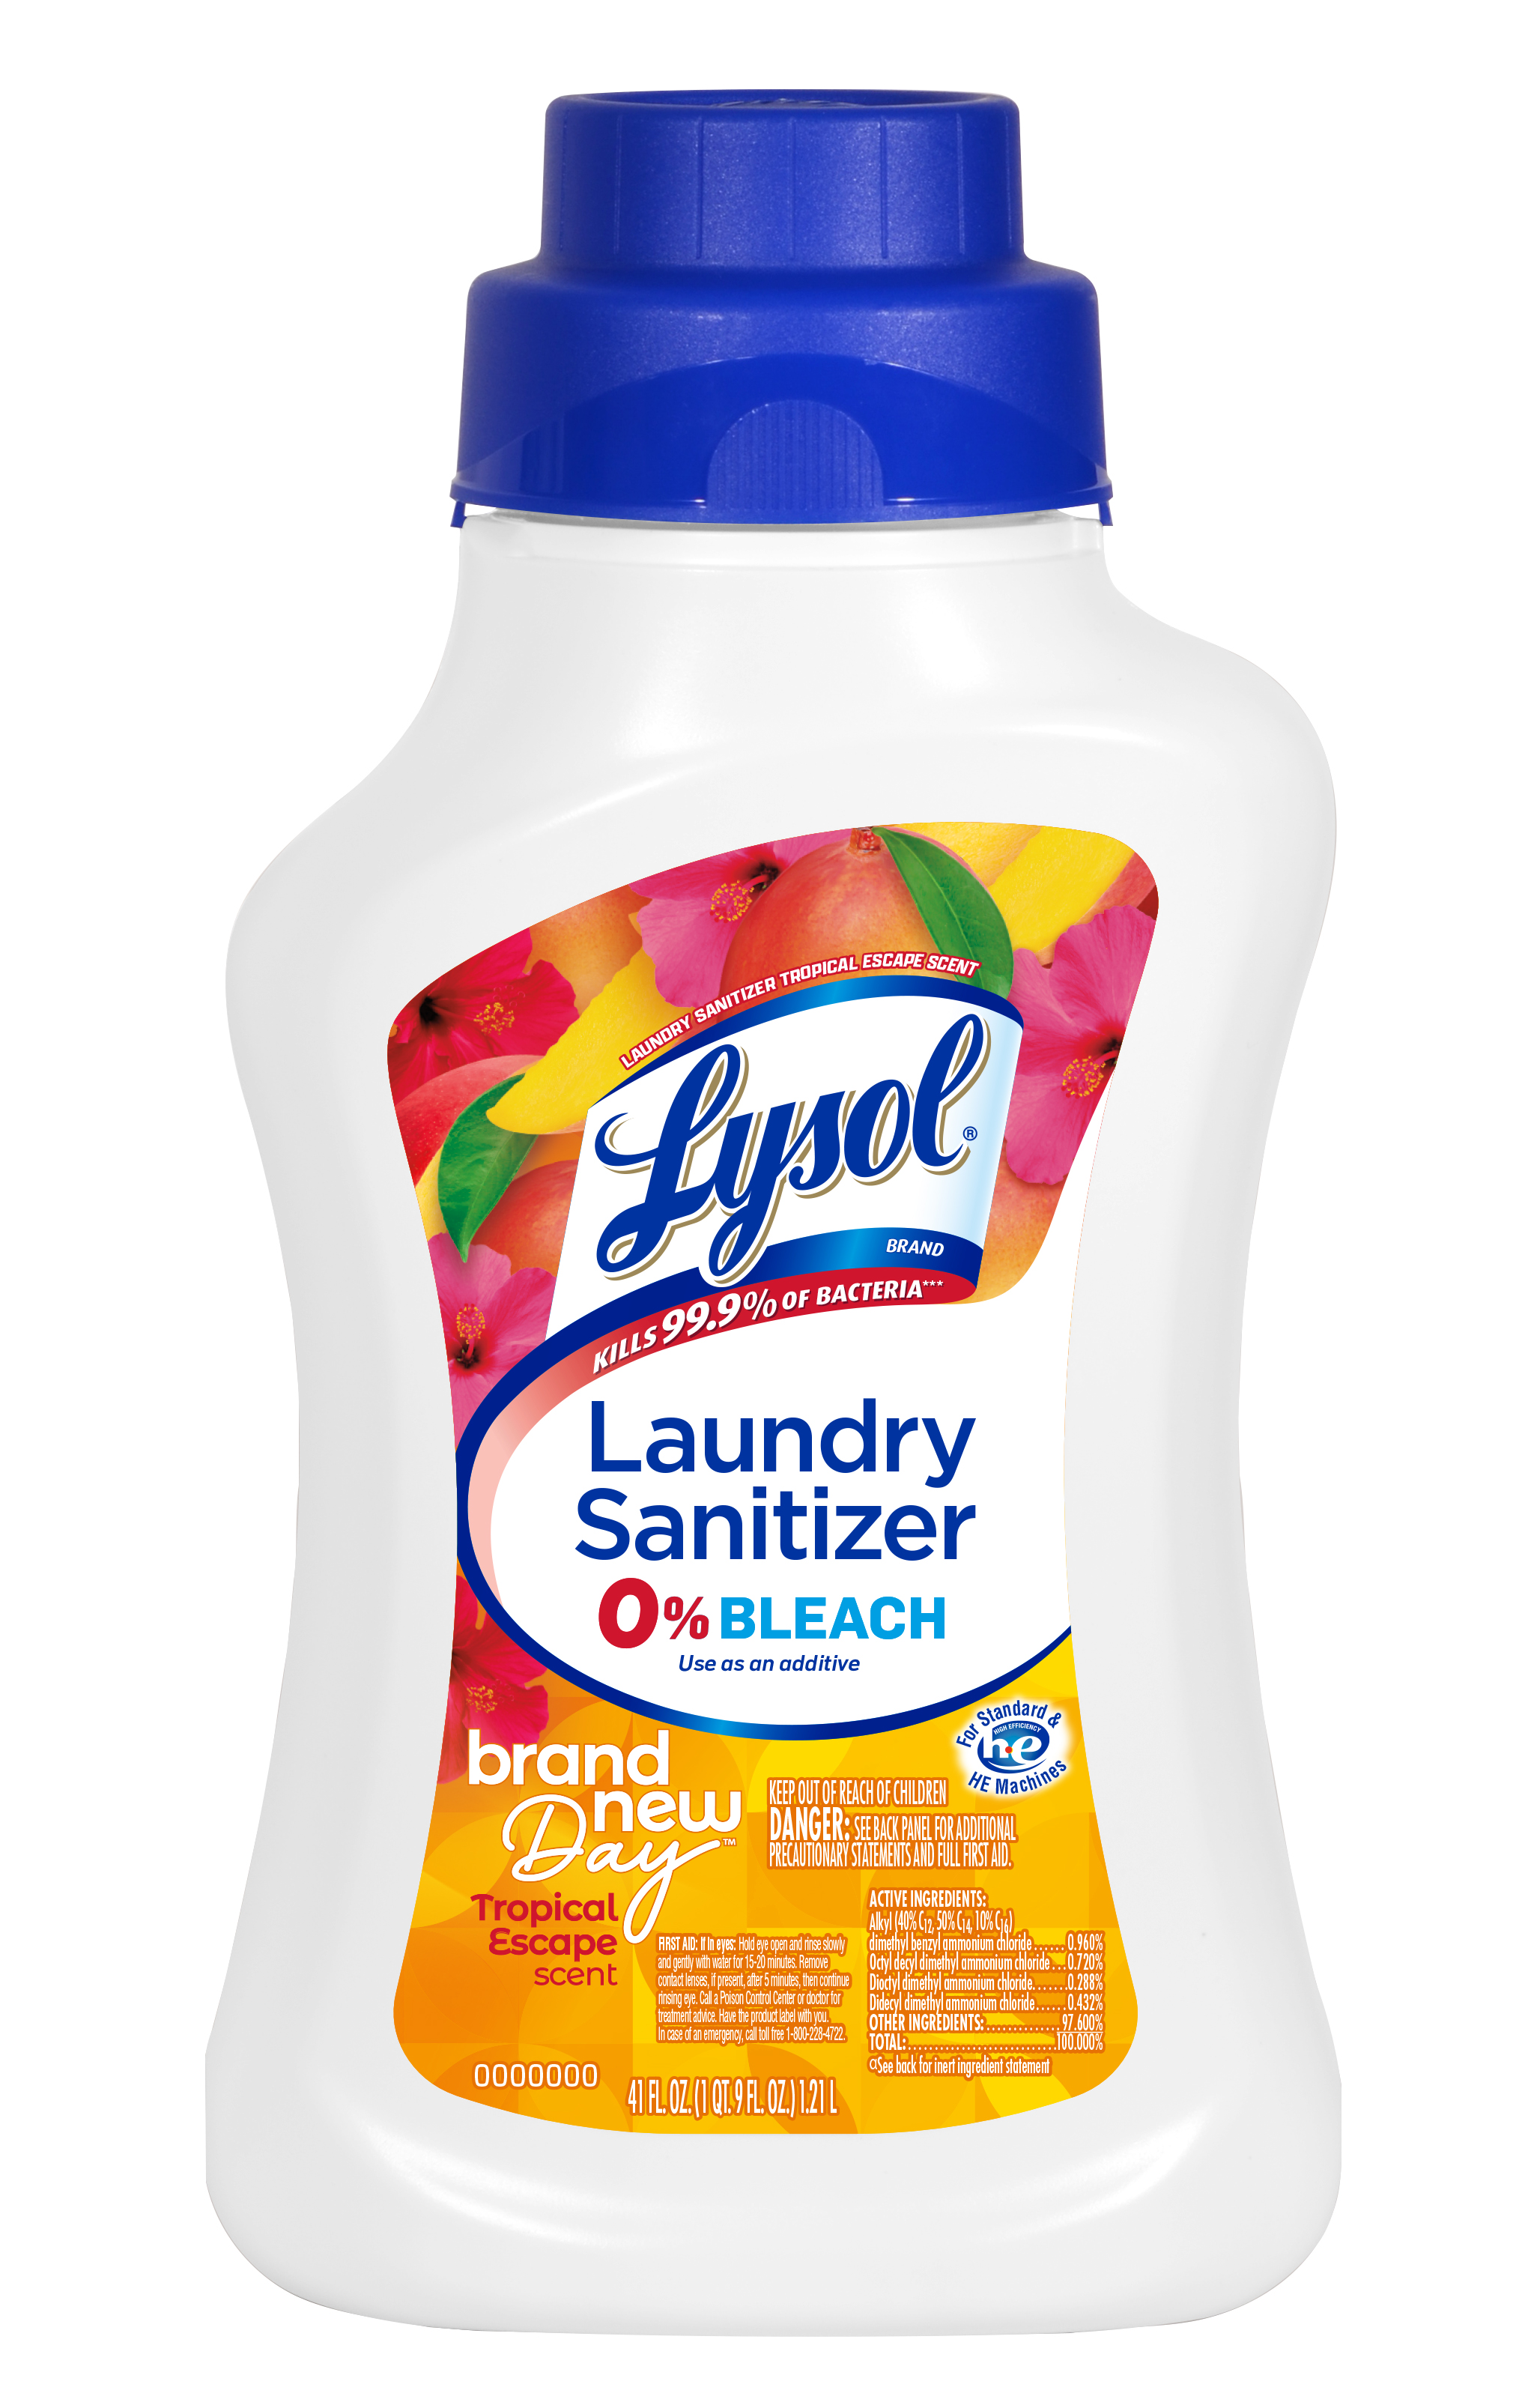 Lysol Laundry Sanitizer Brand New Day Tropical Escape